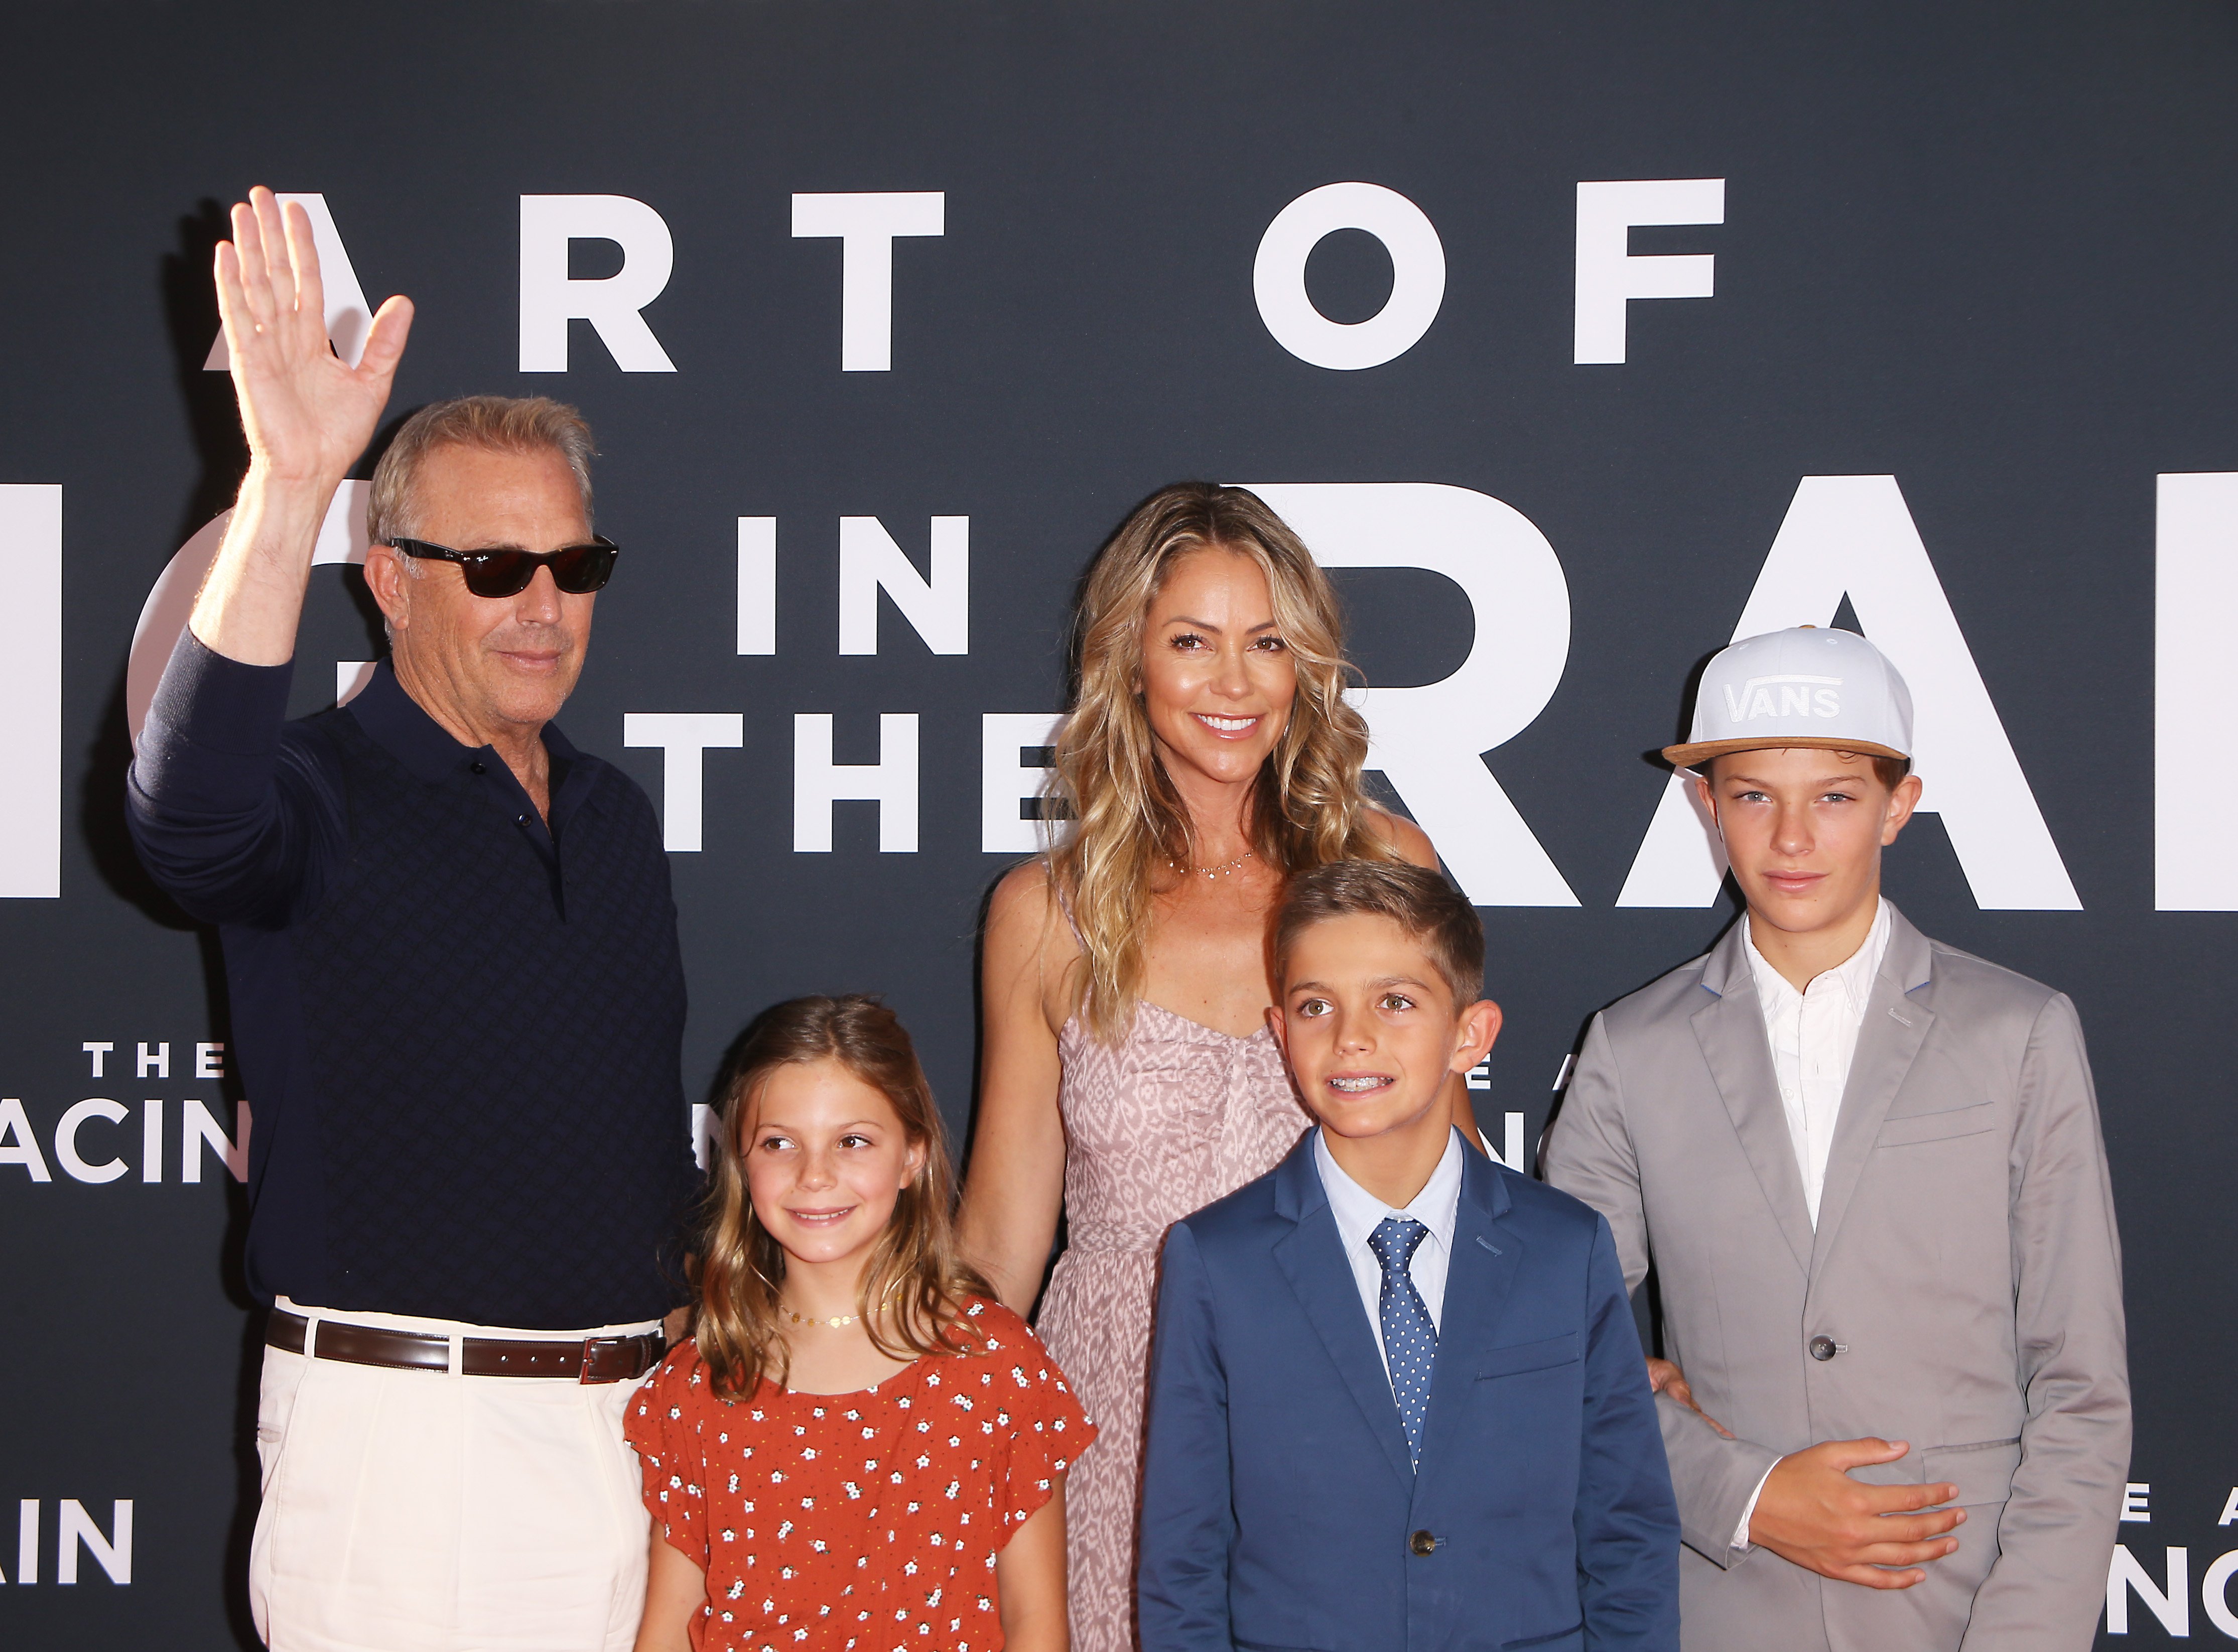 Kevin Costner with wife Christine Baumgartner and three of his children at the premiere of "The Art of Racing in the Rain" in Los Angeles, California on August 1, 2019 | Photo: Getty Images